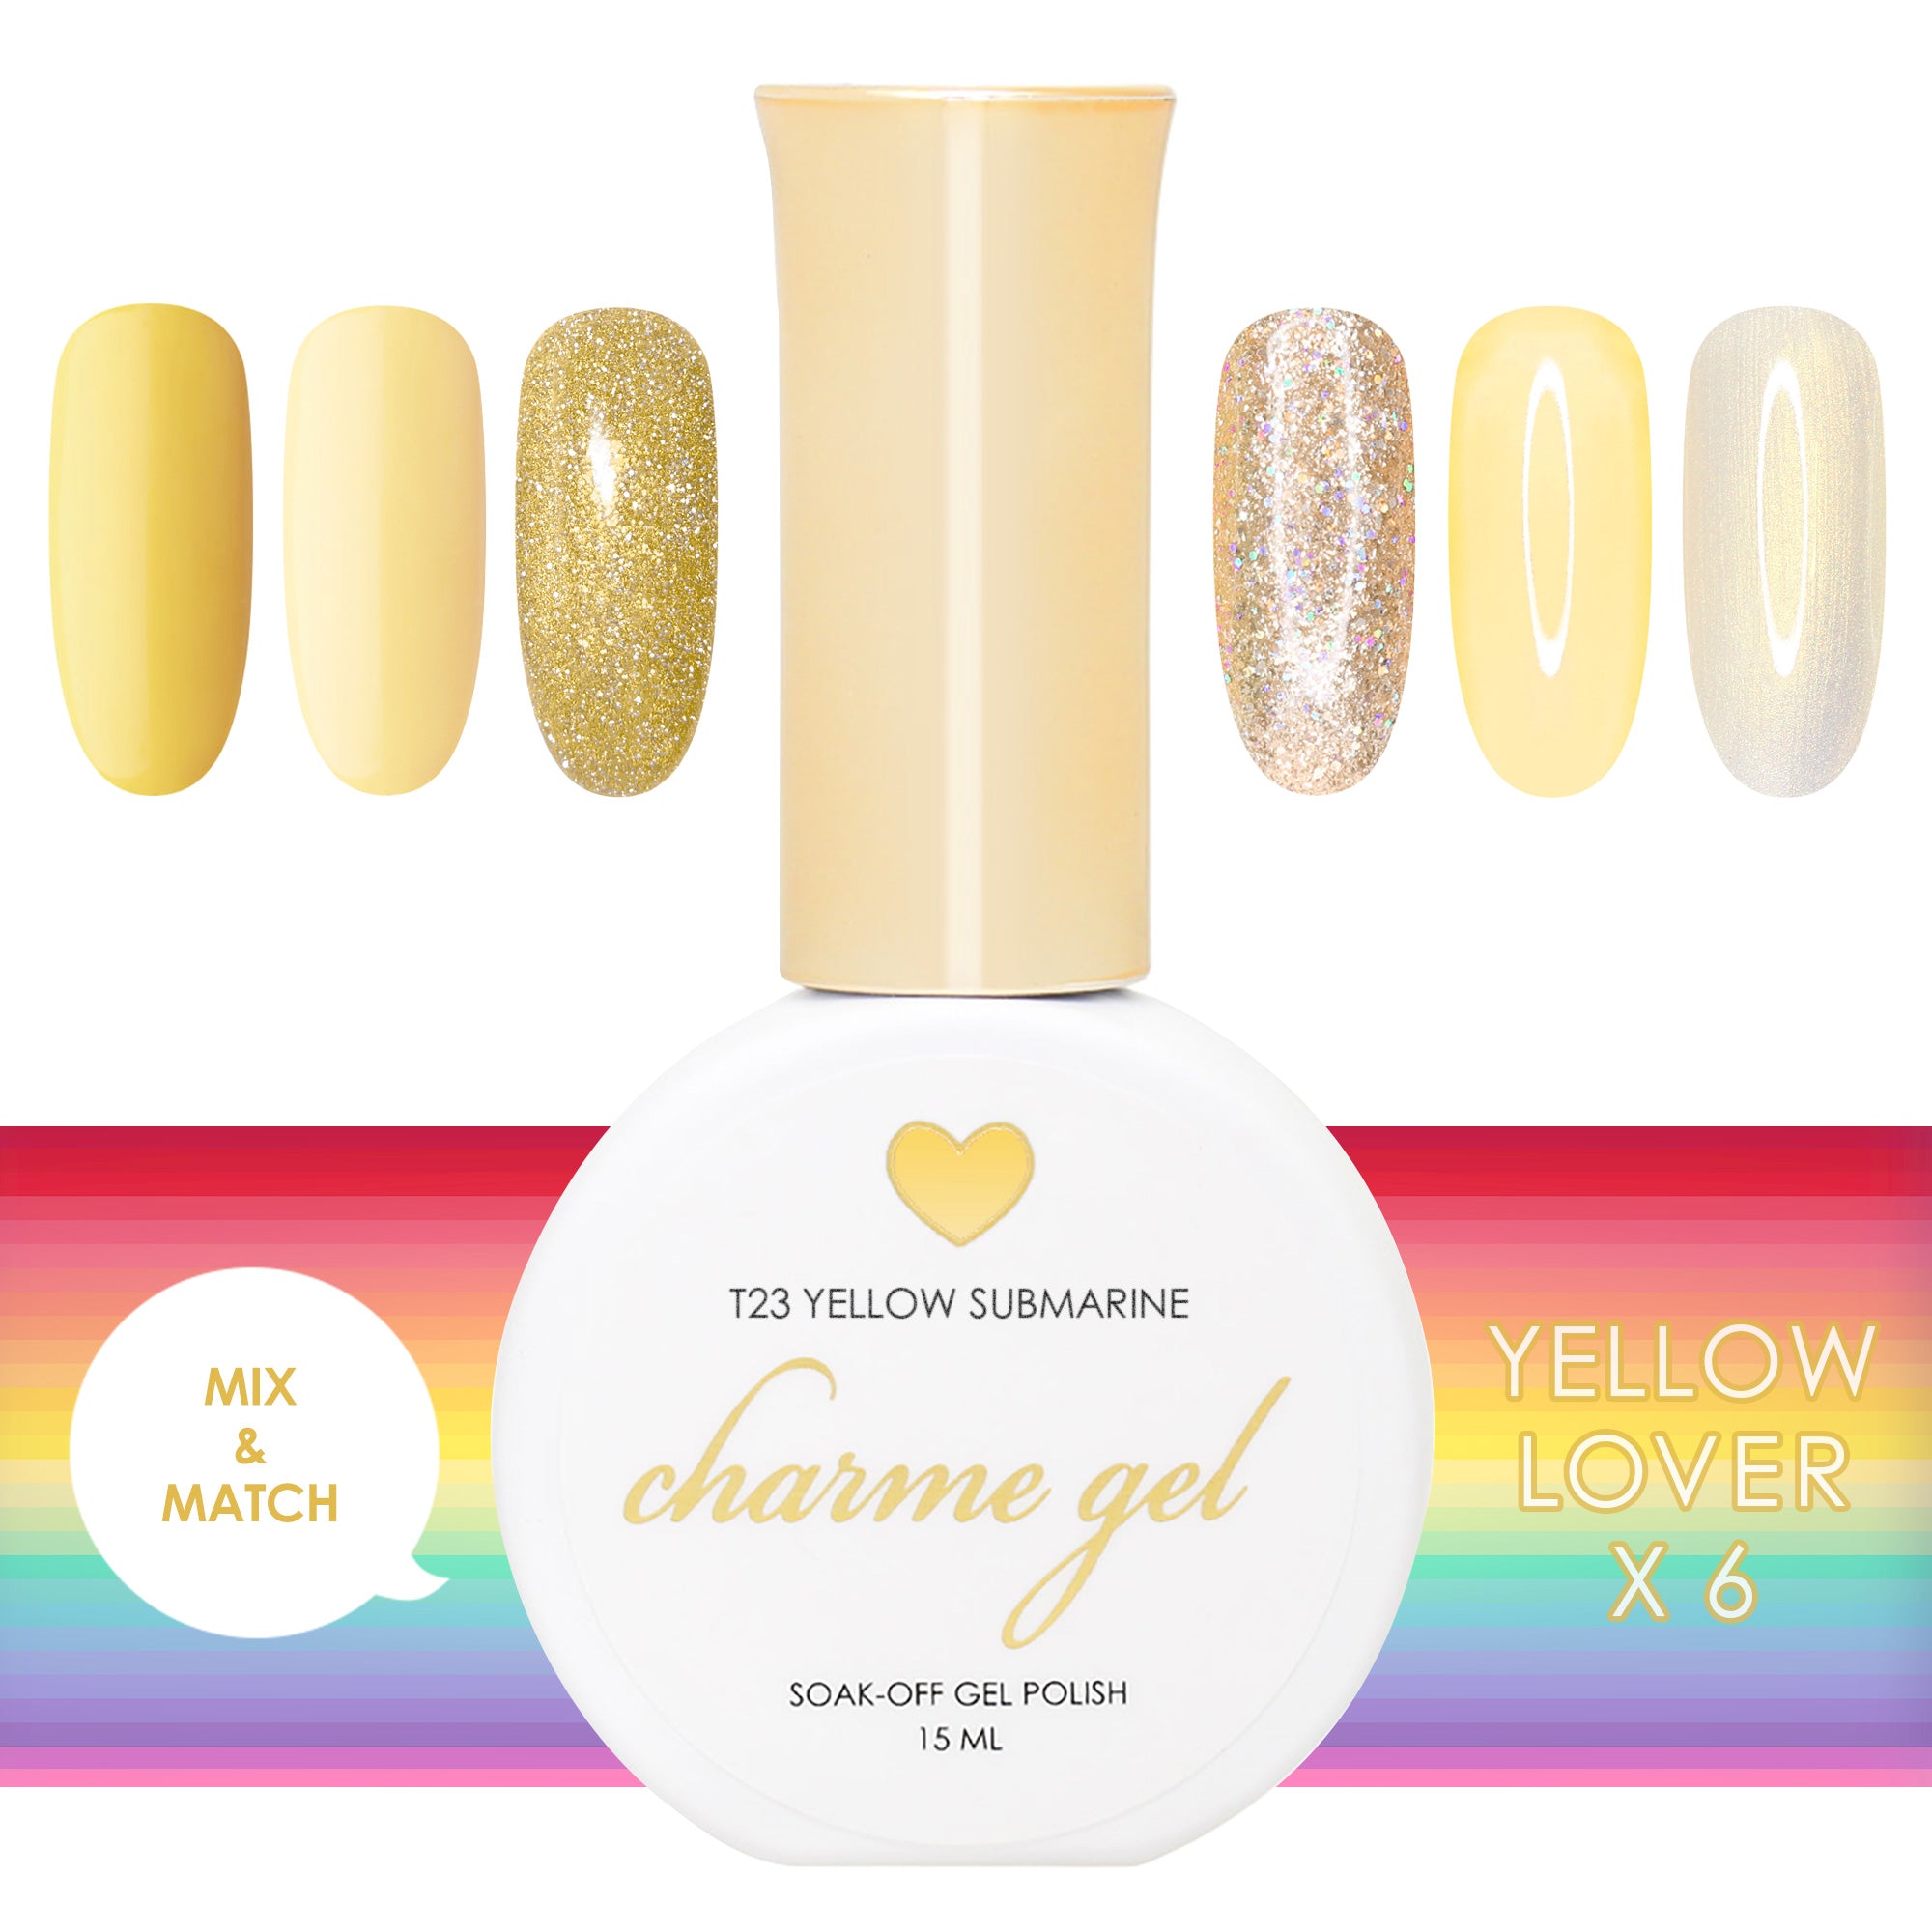 Charme Gel Rainbow Lover Yellow Collection / 6 Colors Creme, Reflective Glitter, Holographic, Pearl Shimmer, Tinted Glass